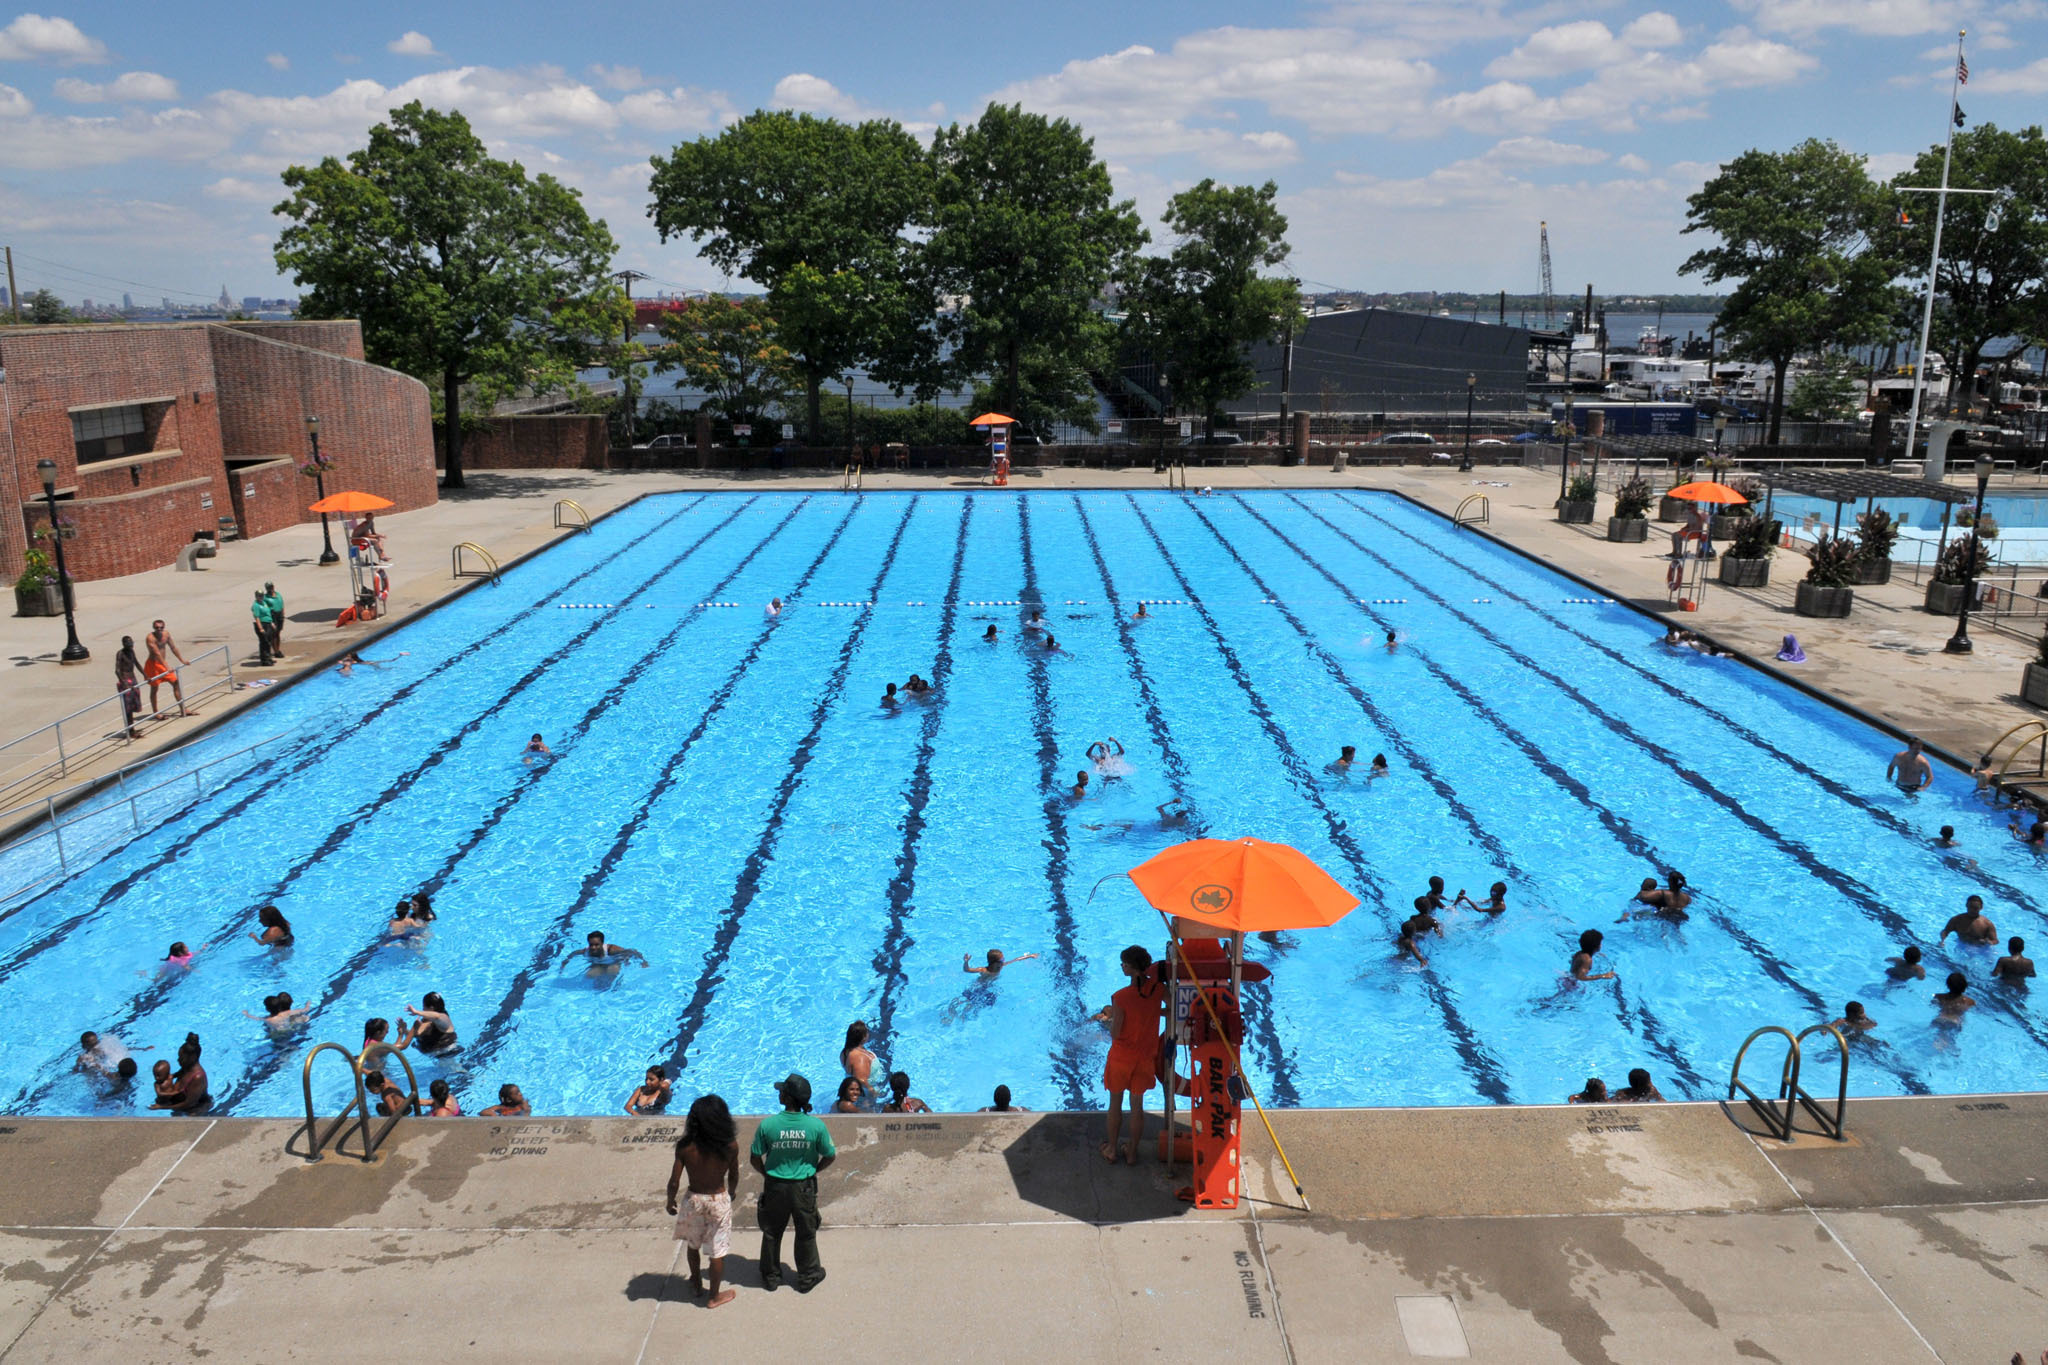 Best public swimming pools to cool off this summer in NYC